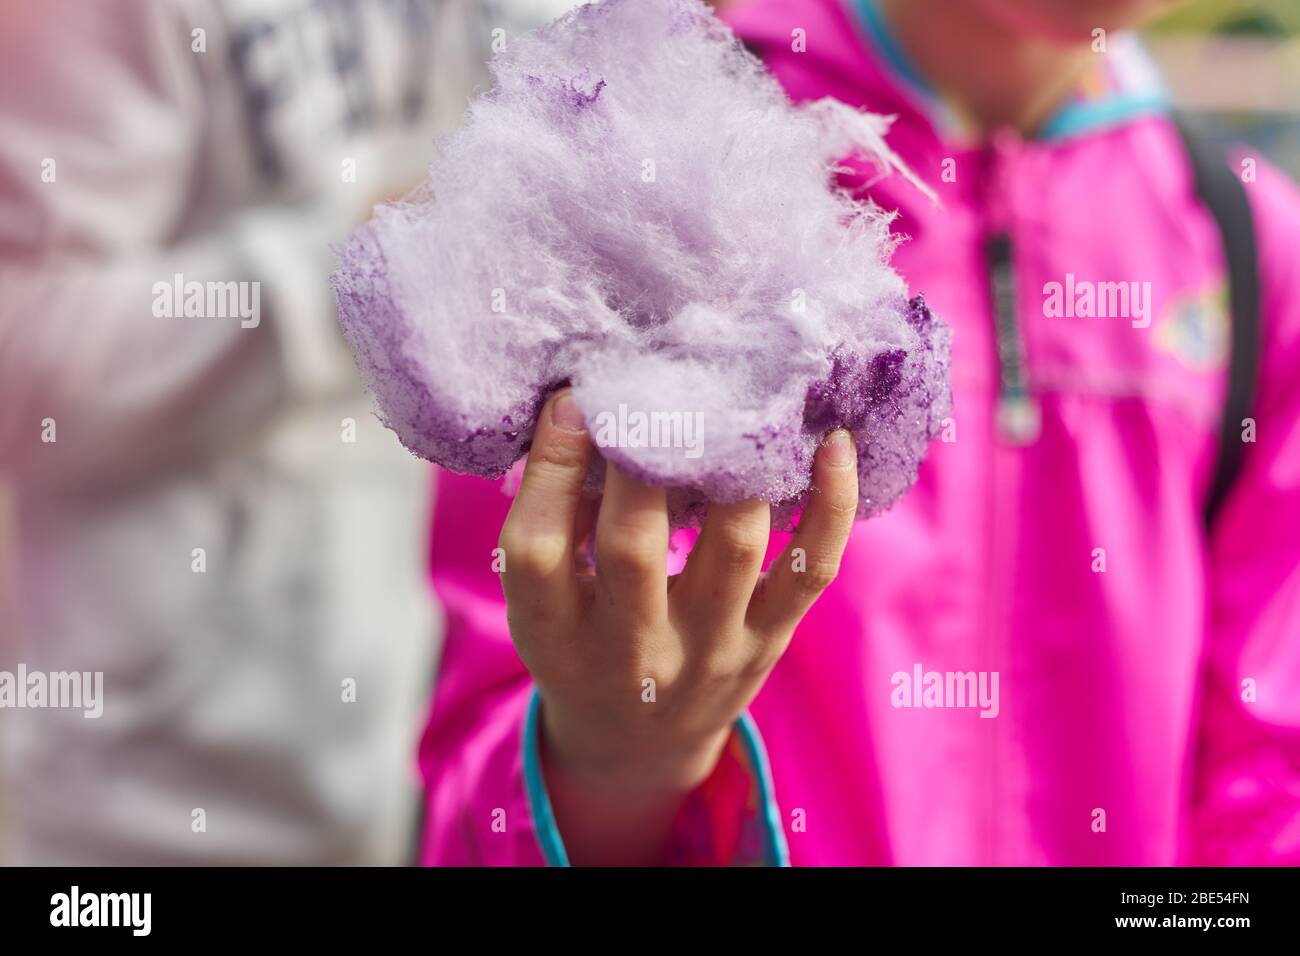 Candy Floss Child High Resolution Stock Photography and Images - Alamy